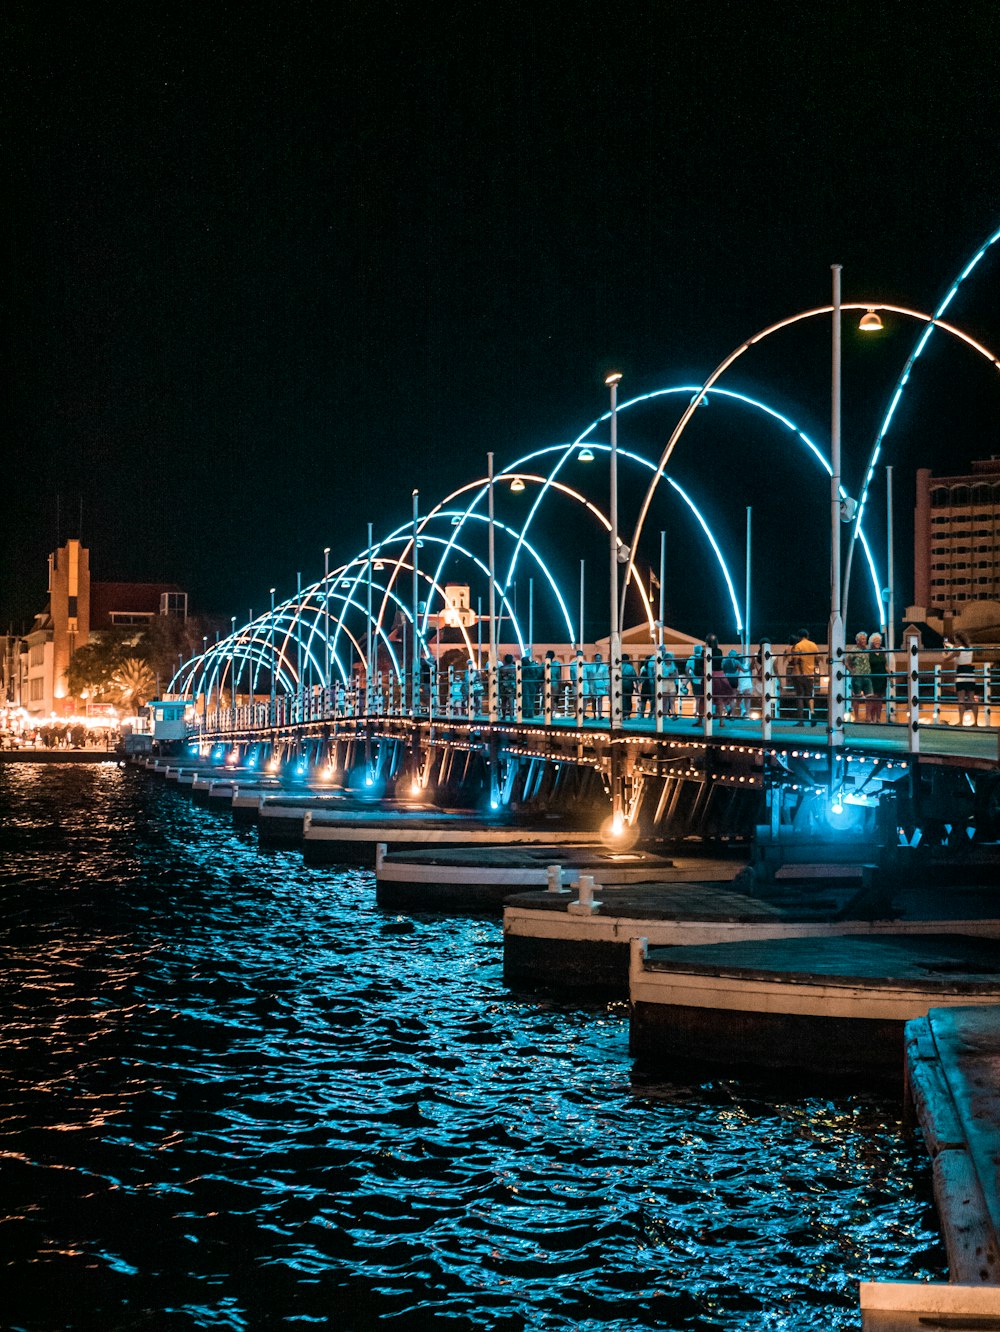 a long bridge over a body of water at night